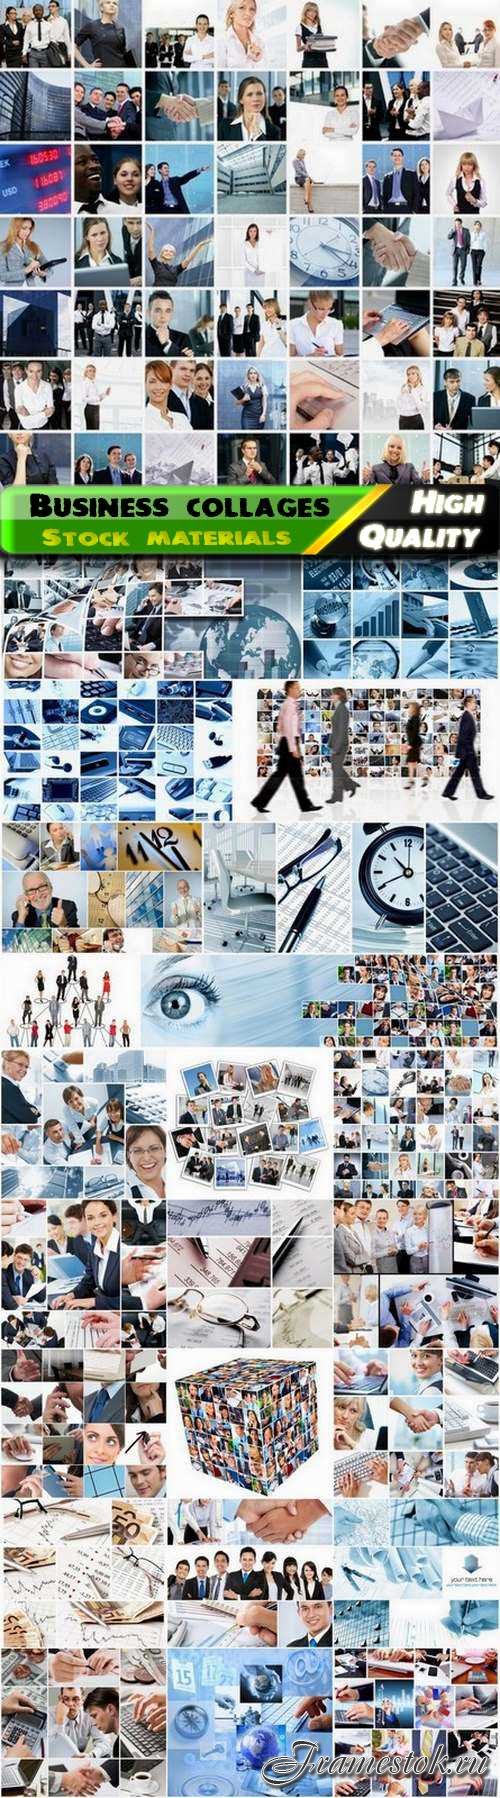 Business company people and worker collage - 25 HQ Jpg